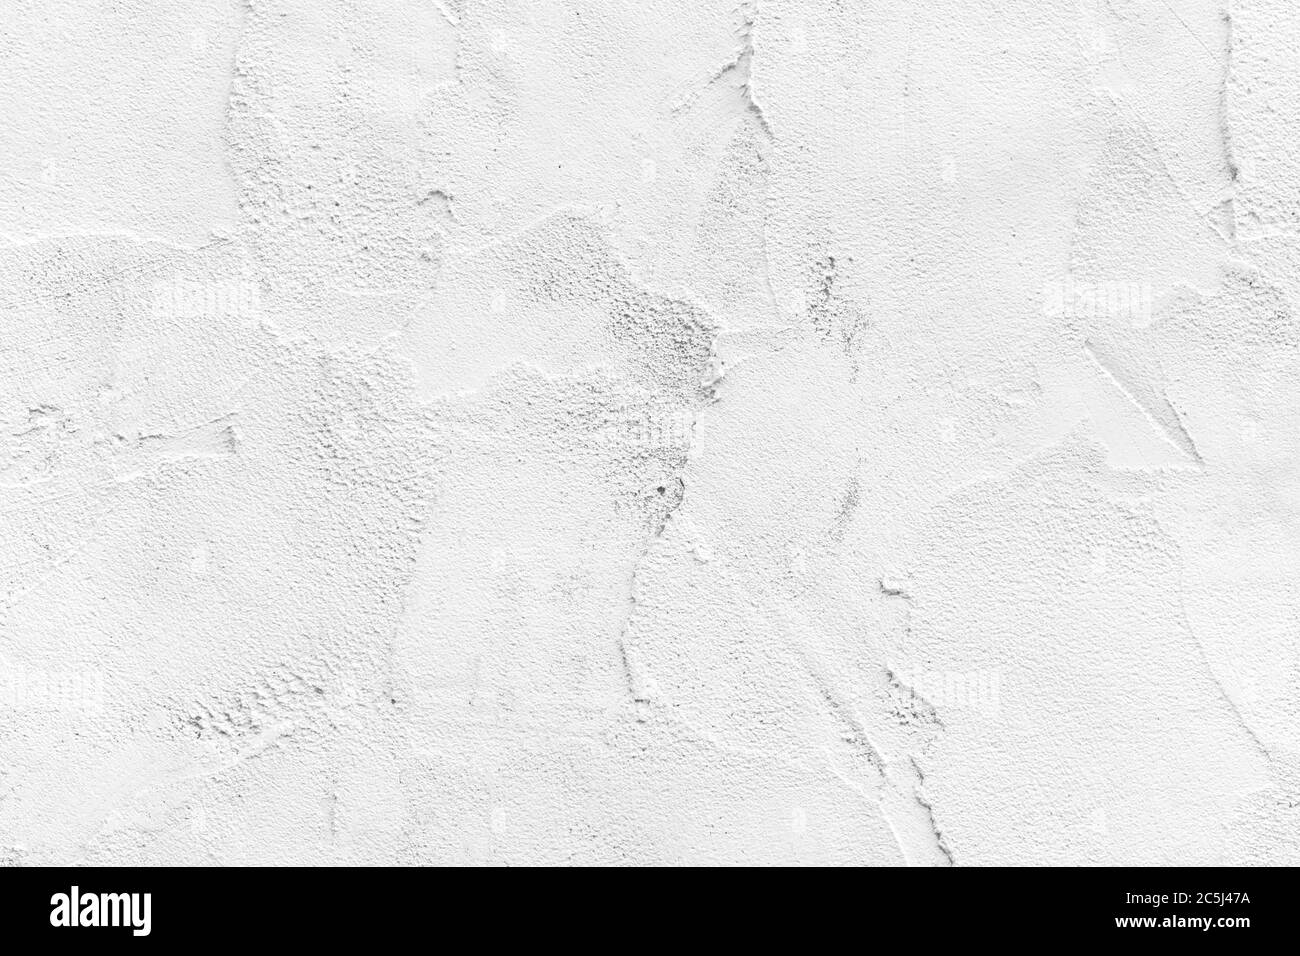 Grunge blank white concrete wall. Design for texture background Stock Photo